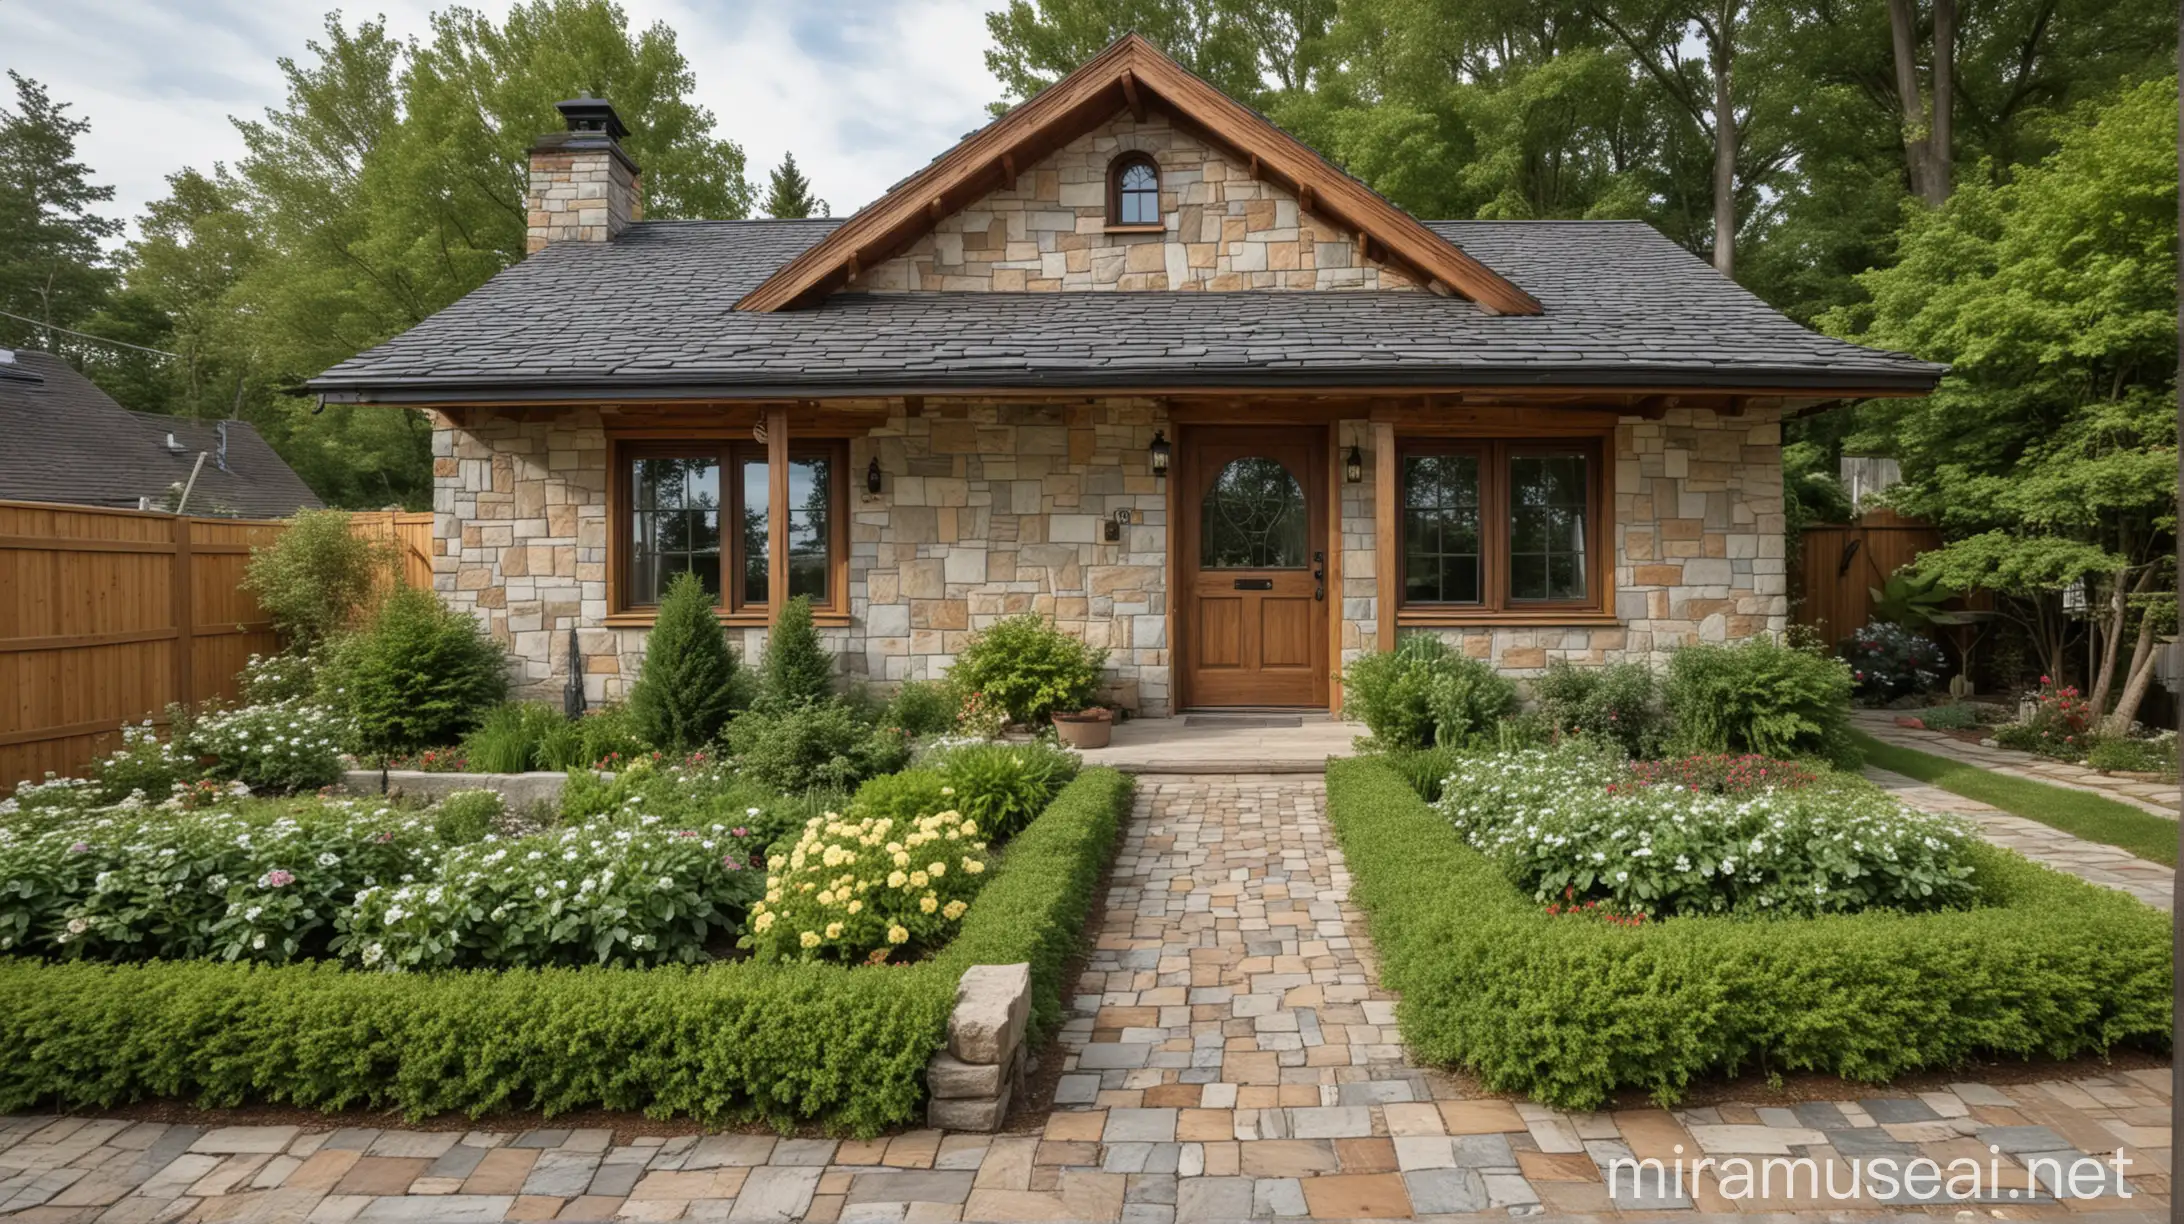 A wide-angle shot of the cottage, showcasing the tiled walls, wooden front door, and the beautiful landscape design of the front yard.